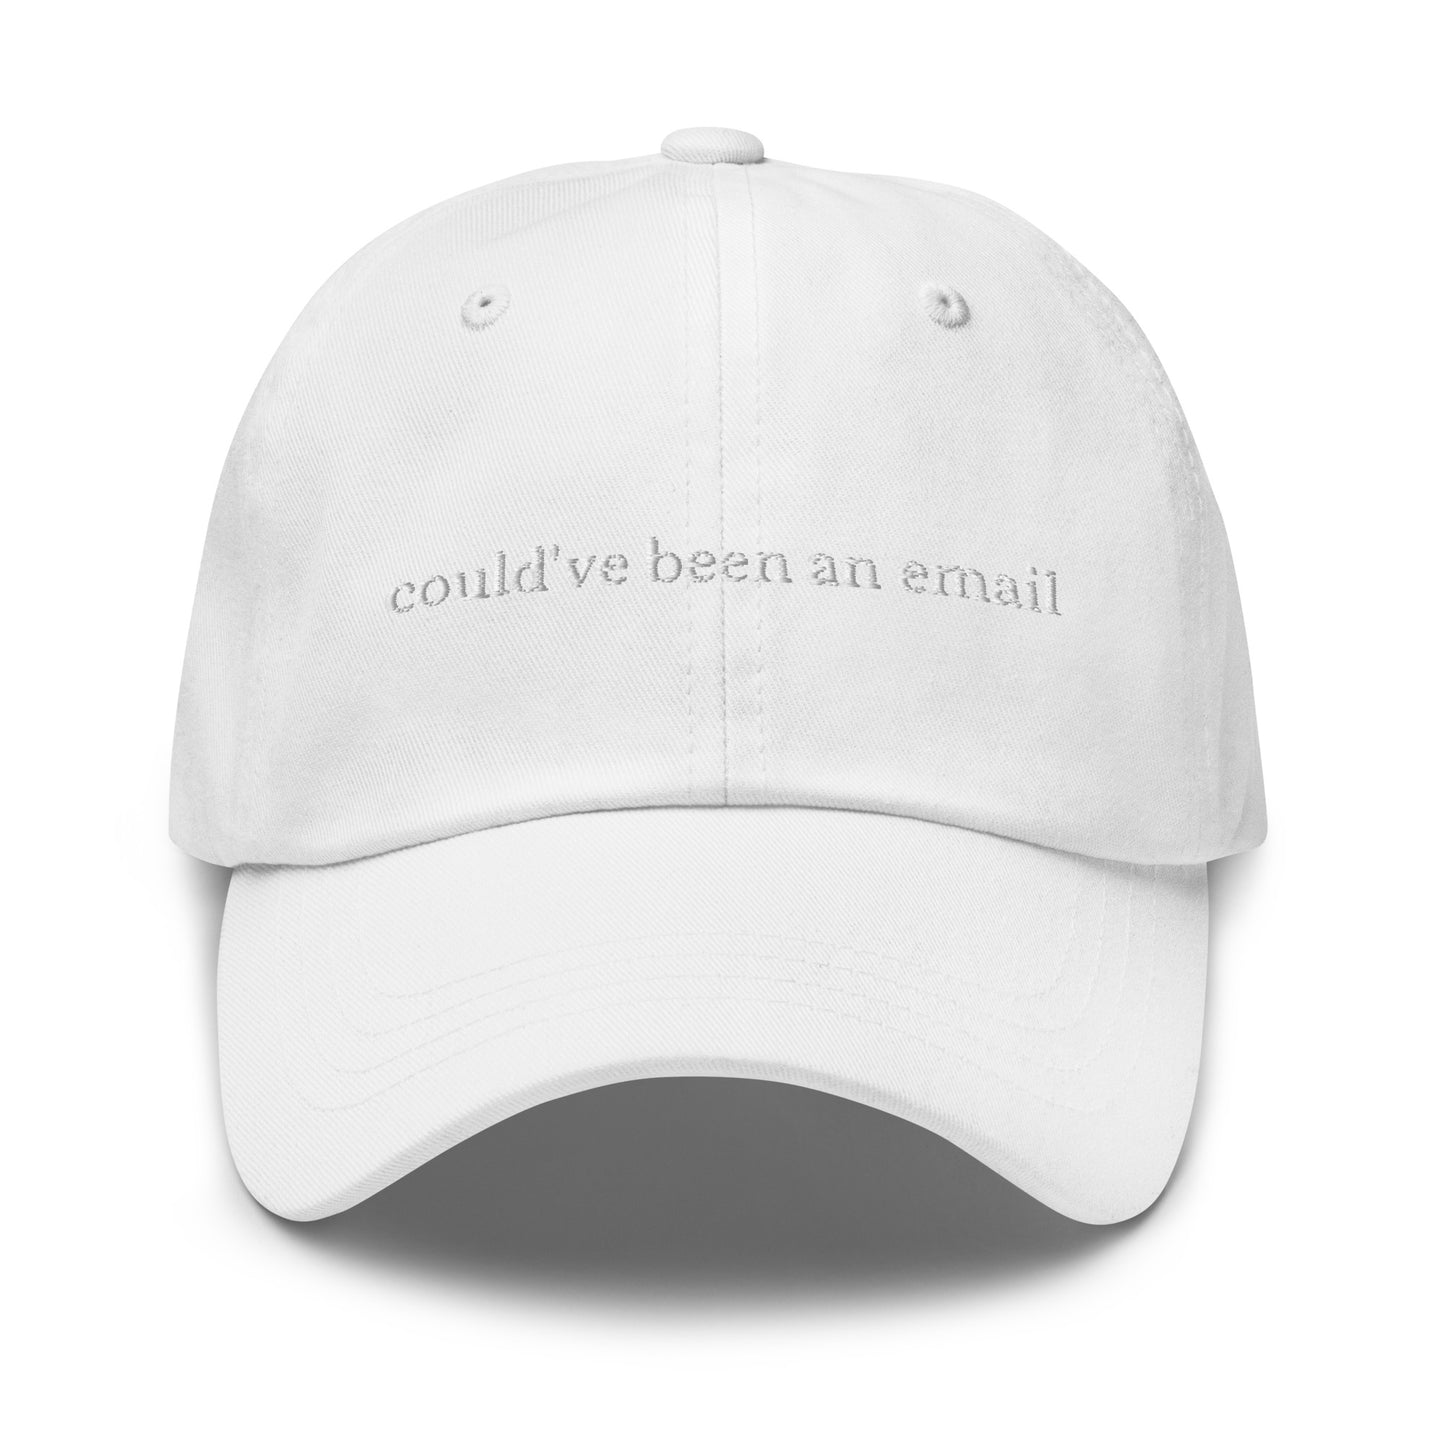 Could've Been An Email Cap